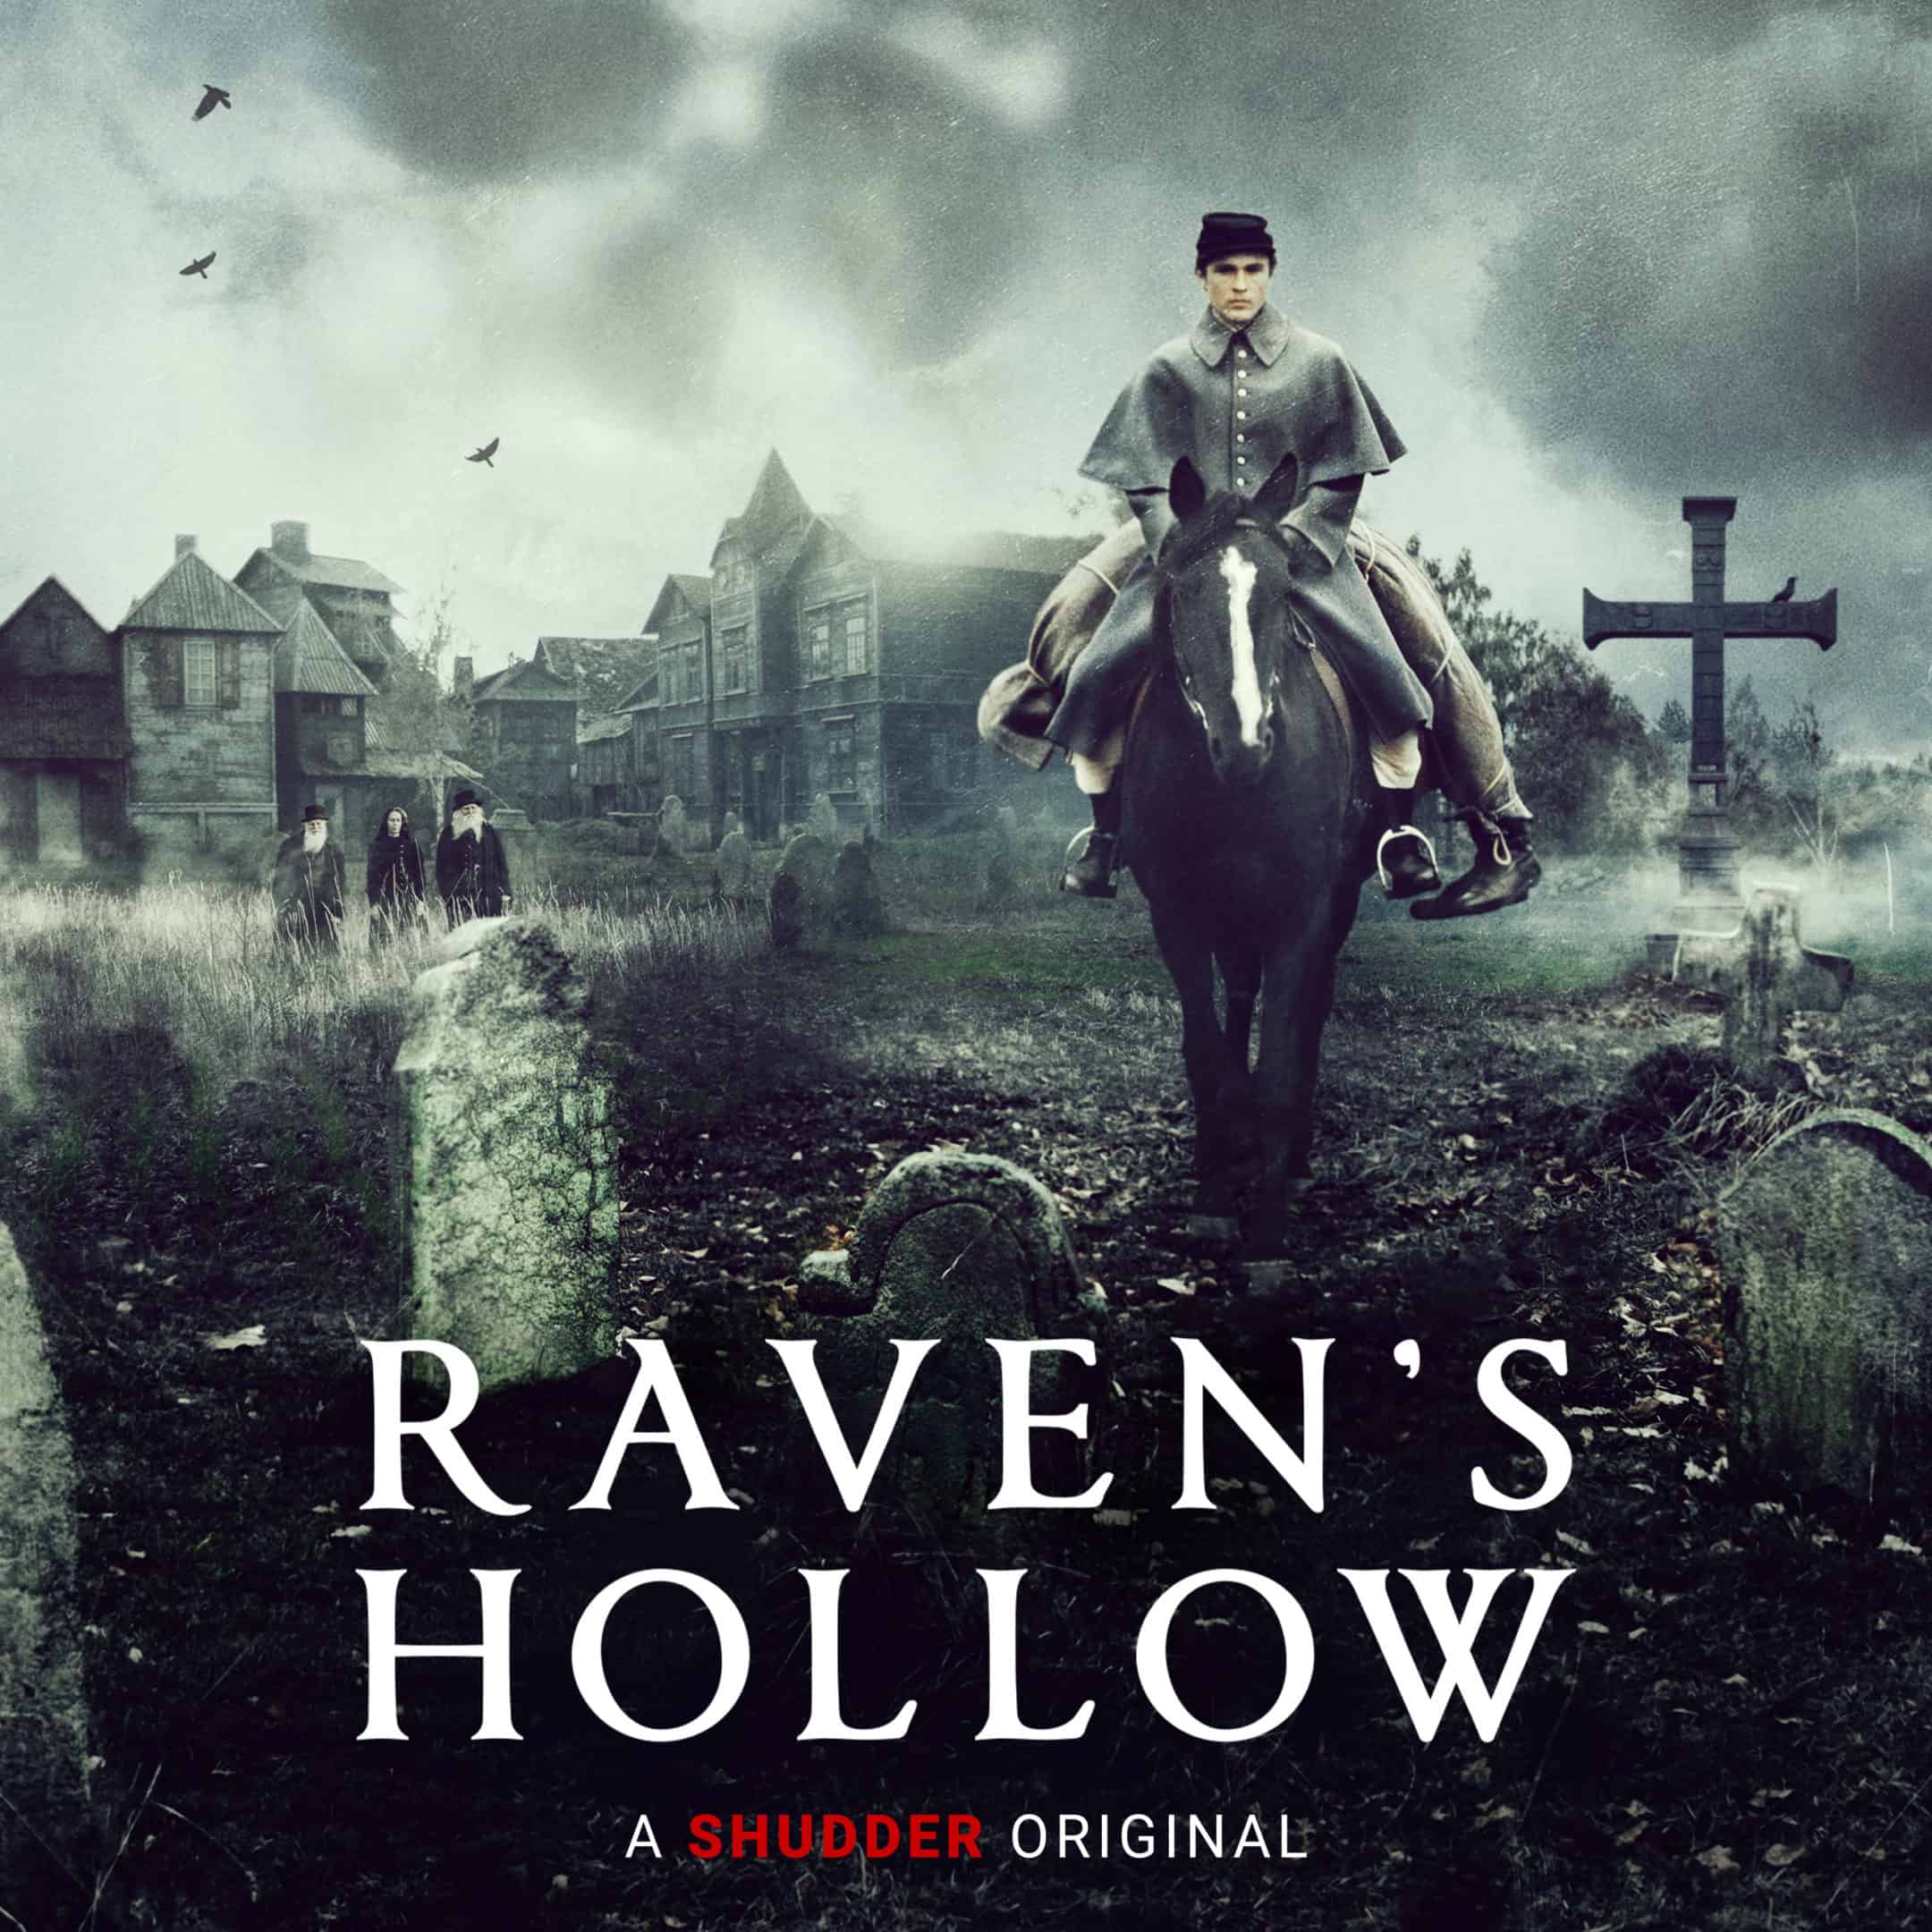 Raven's Hollow comes to Shudder on September 22nd 18